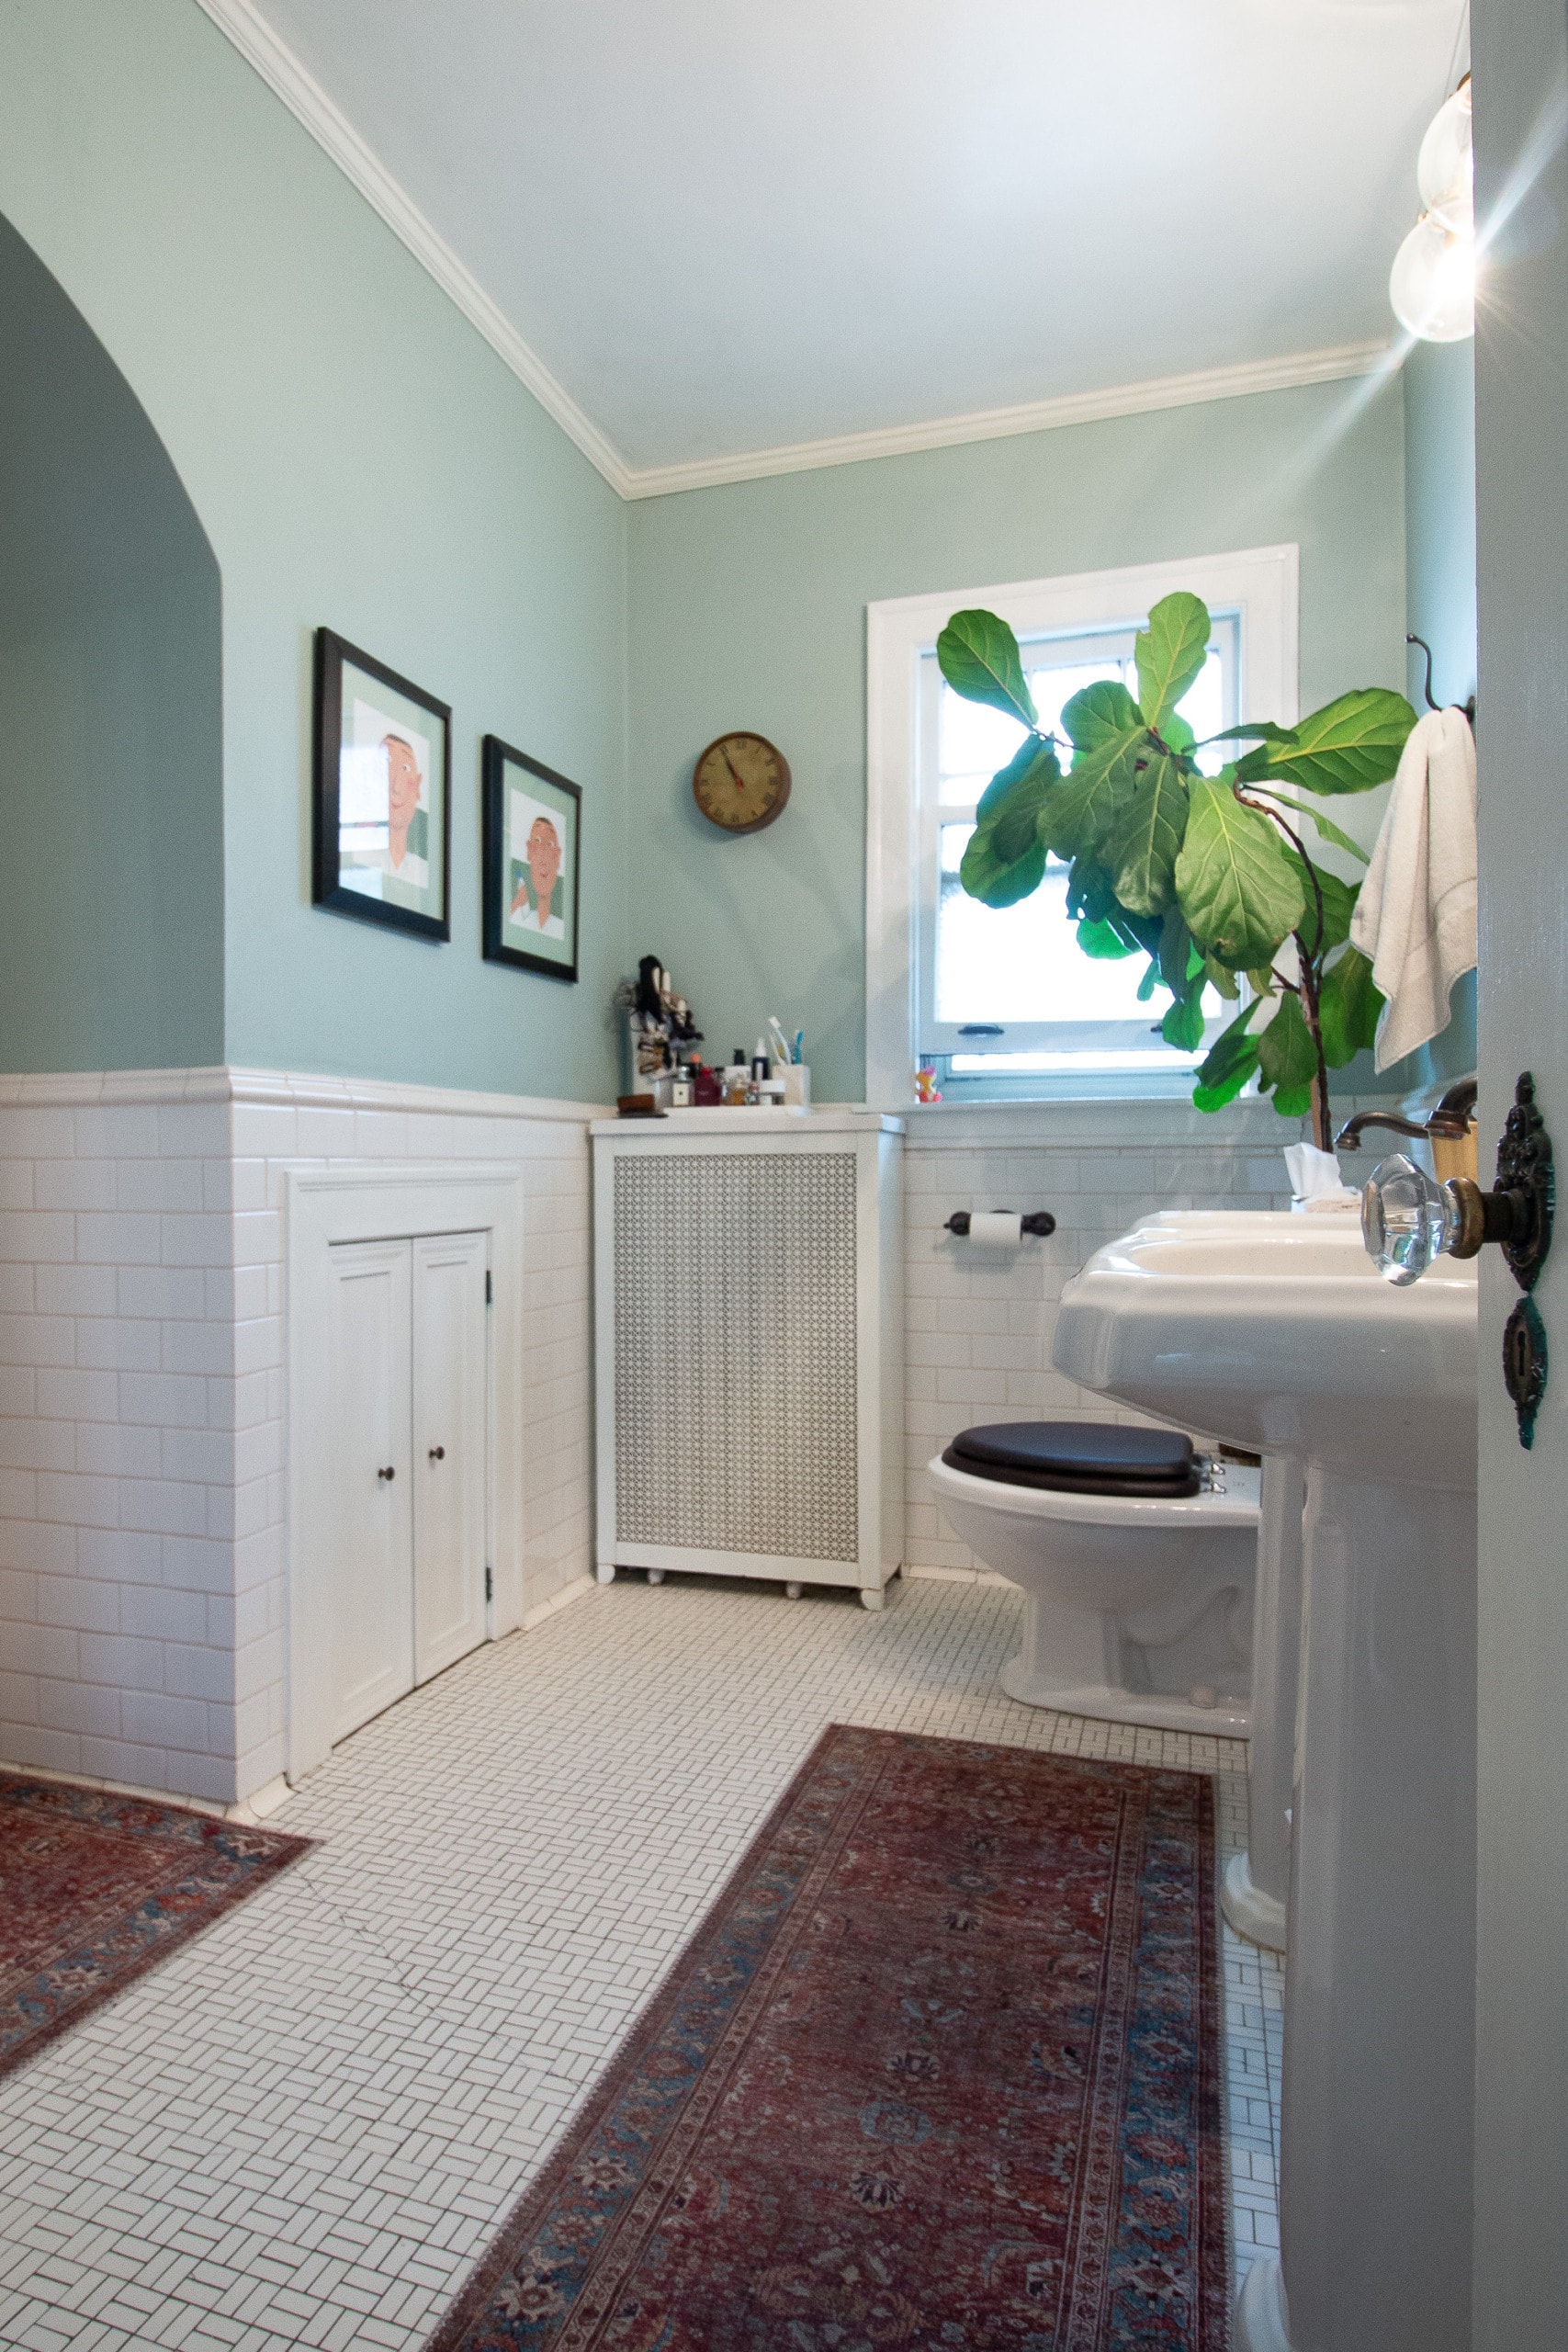 1920s bathroom tile with modern touches